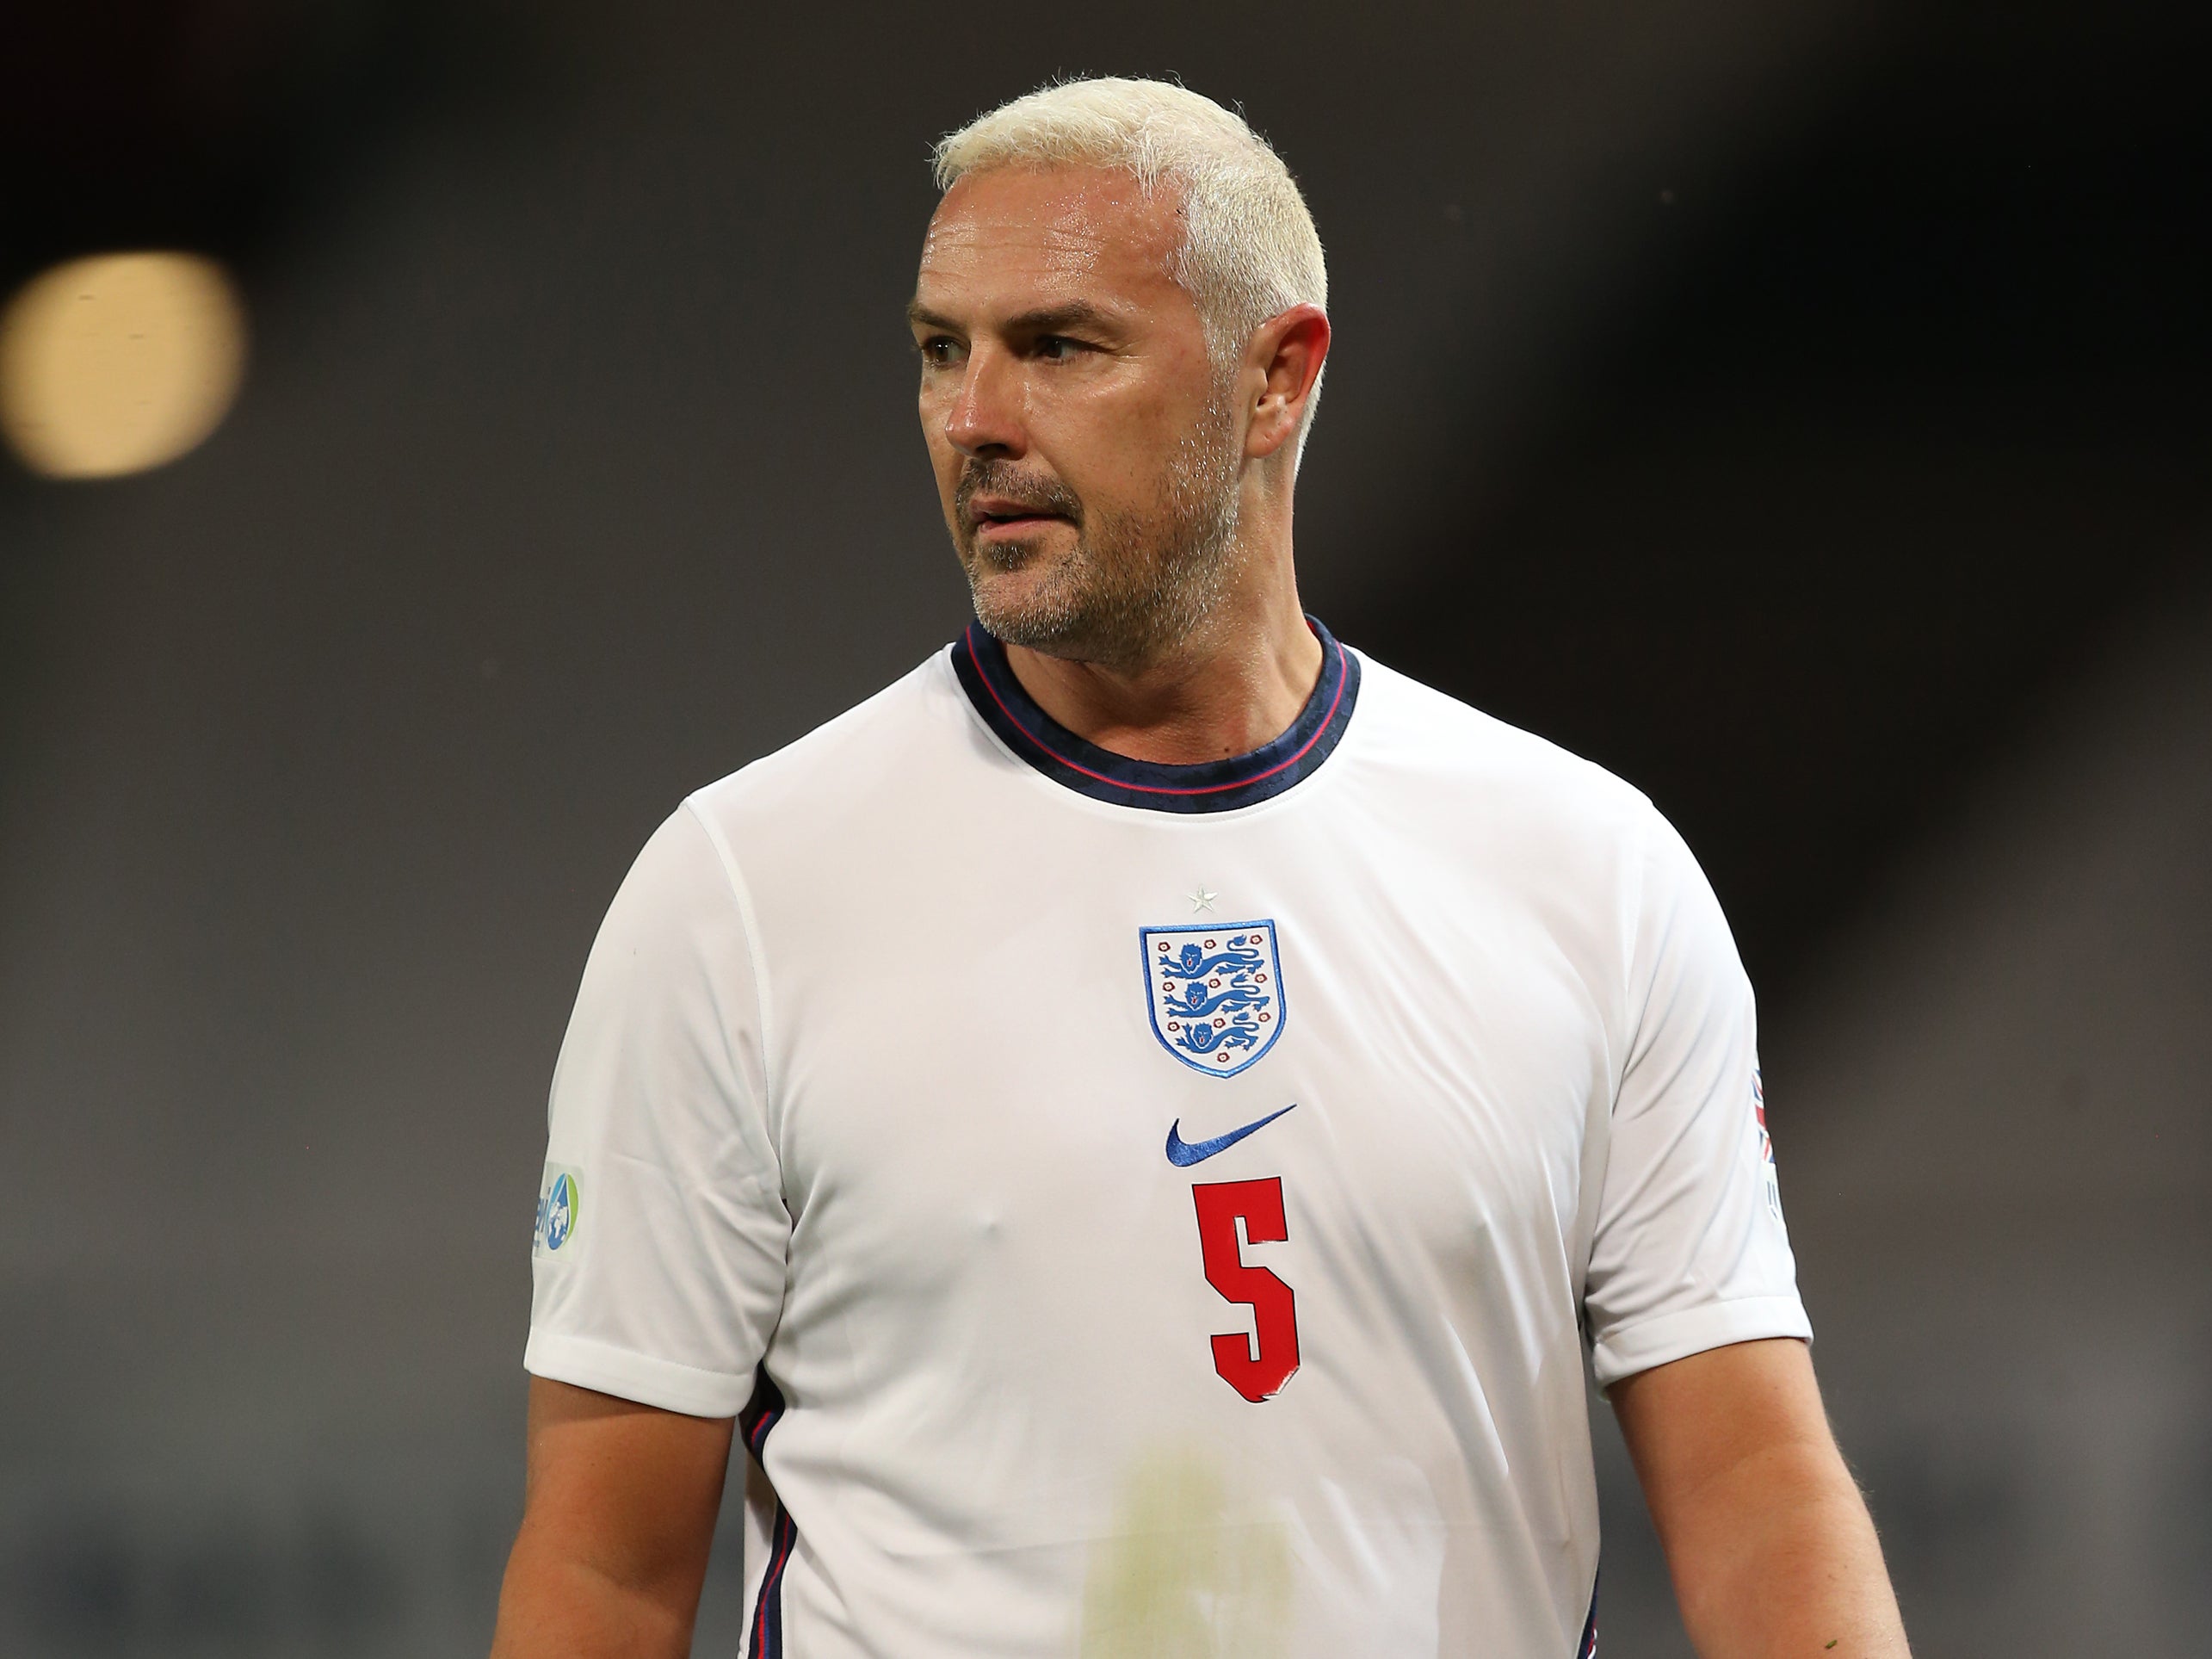 McGuinness playing for England at Soccer Aid 2020